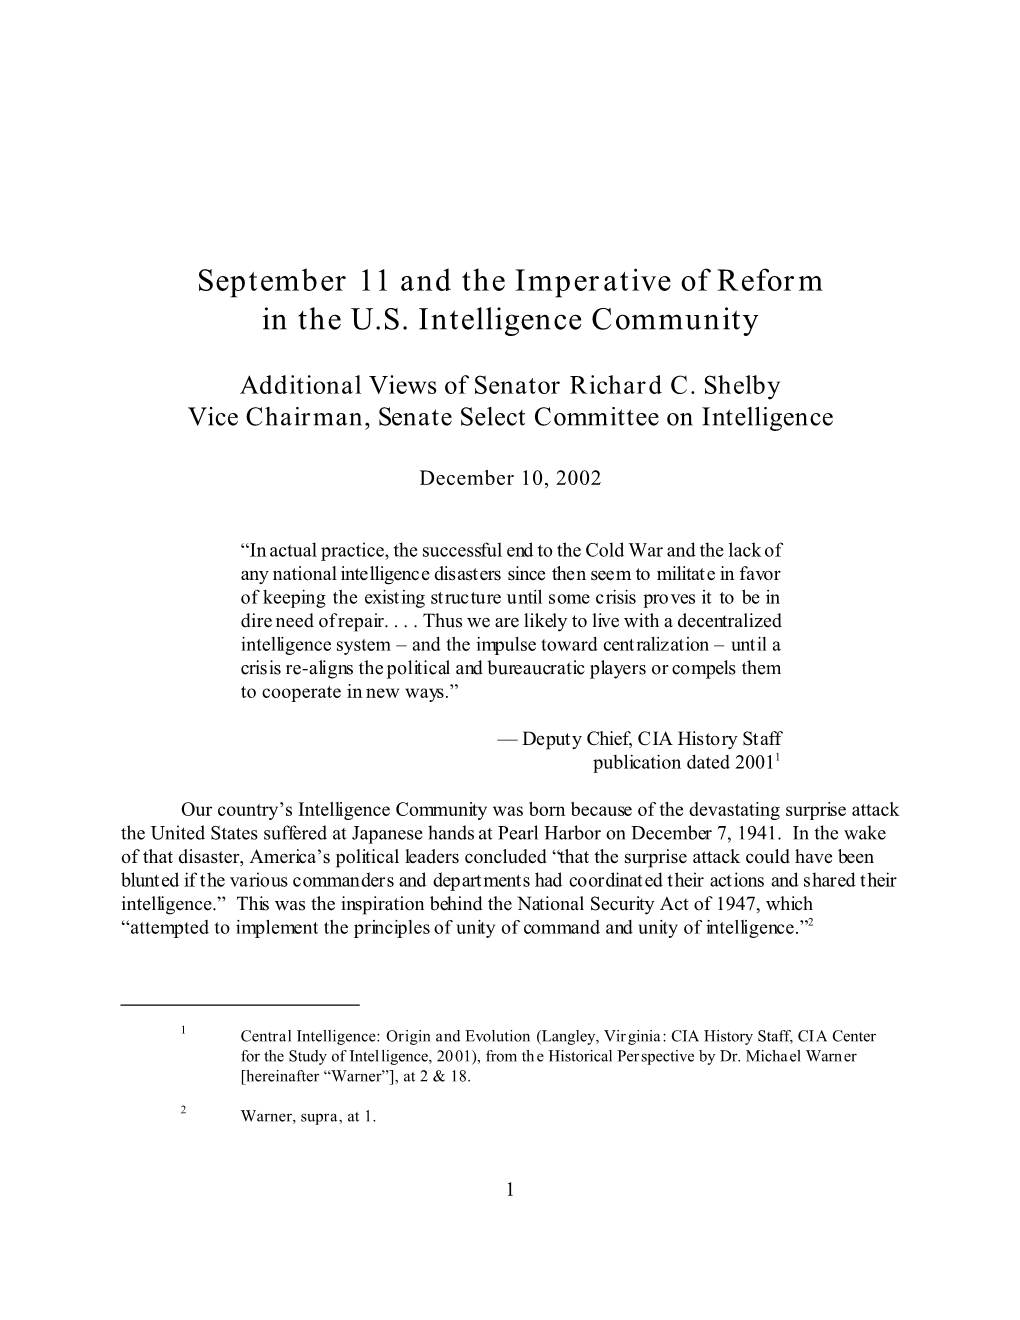 September 11 and the Imperative of Reform in the U.S. Intelligence Community